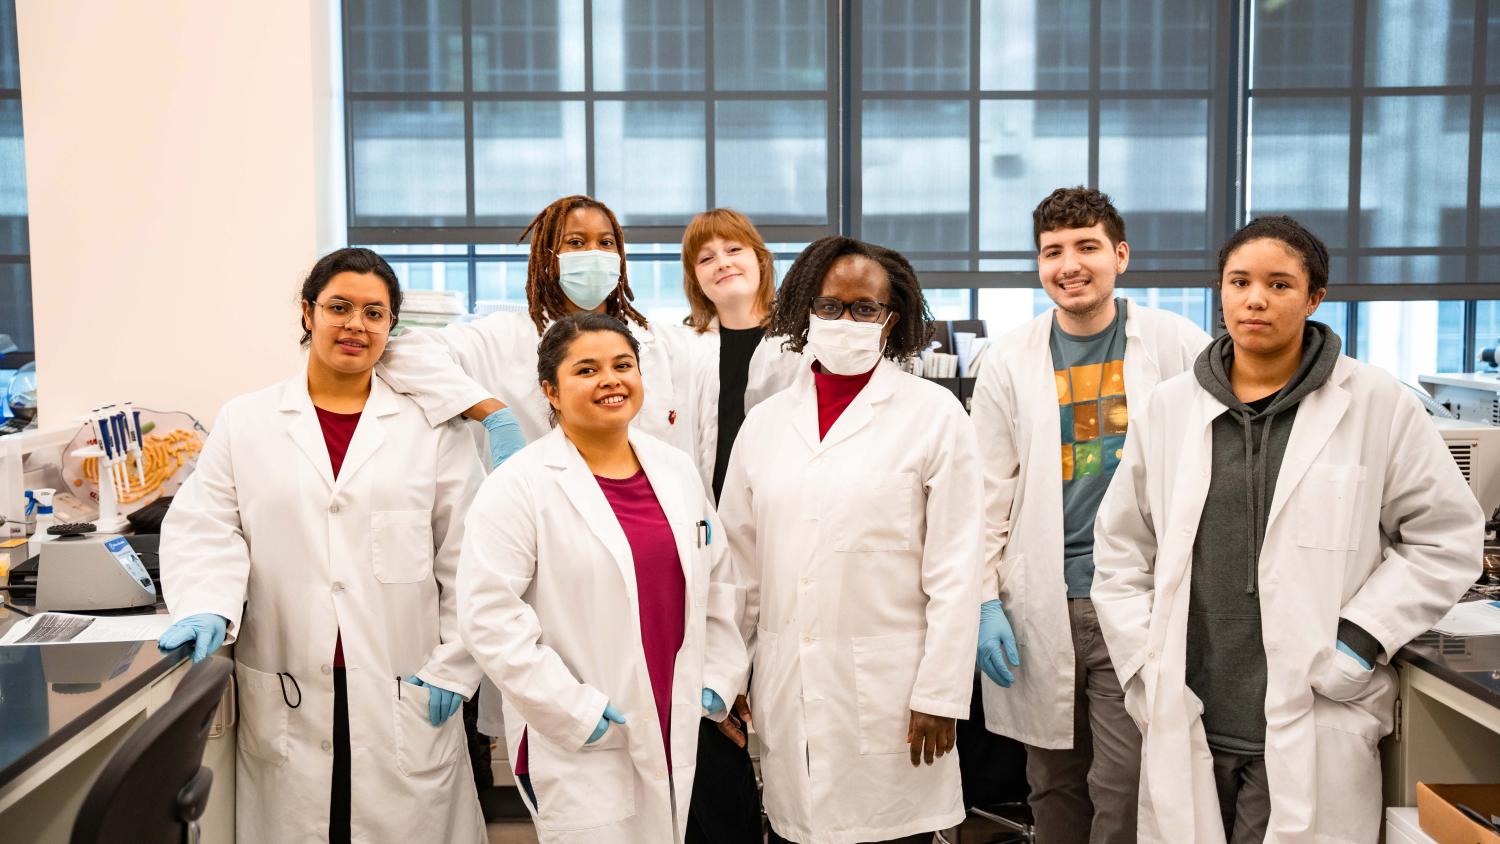 Graduating students at Forsyth Tech, one of Accelerate NC’s biotechnology training partners (Credit: Ash Lucero).